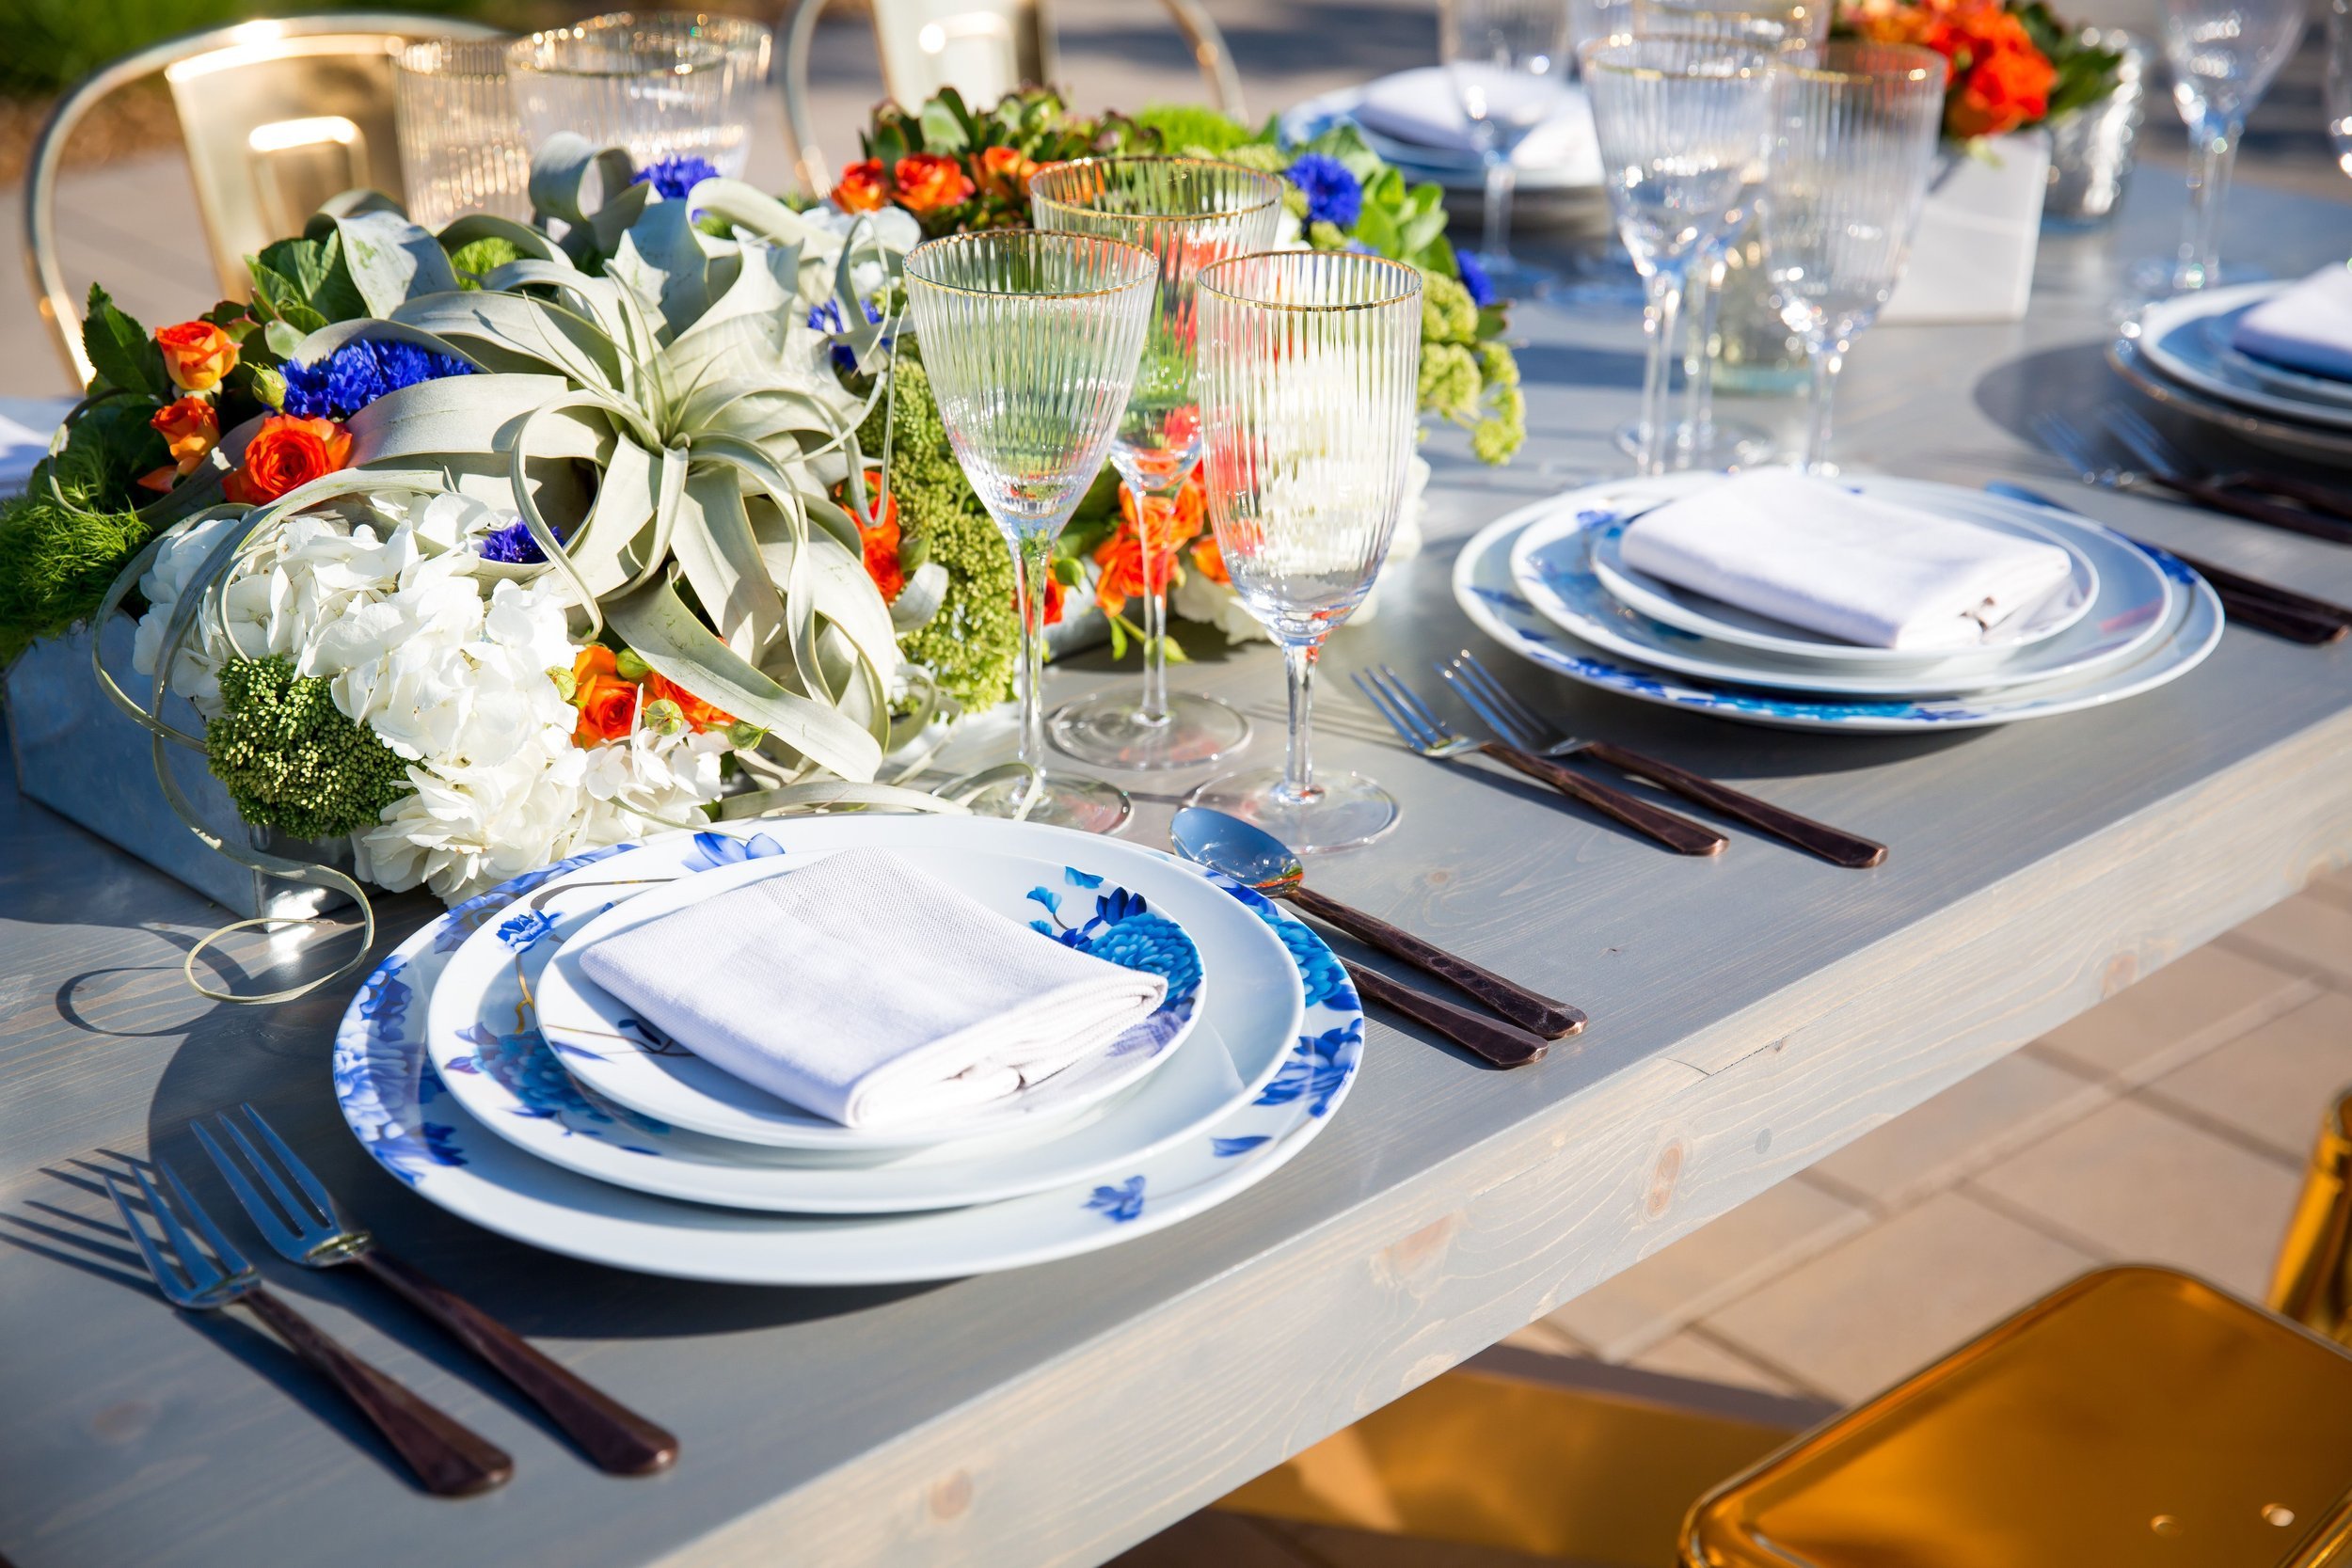 www.santabarbarawedding.com | Bright Event Rentals | Vanity Portrait Studio | Place Setting with Blue and White Plates, Crystal Glassware, Wood and Silver Flatware, and Flower Centerpieces